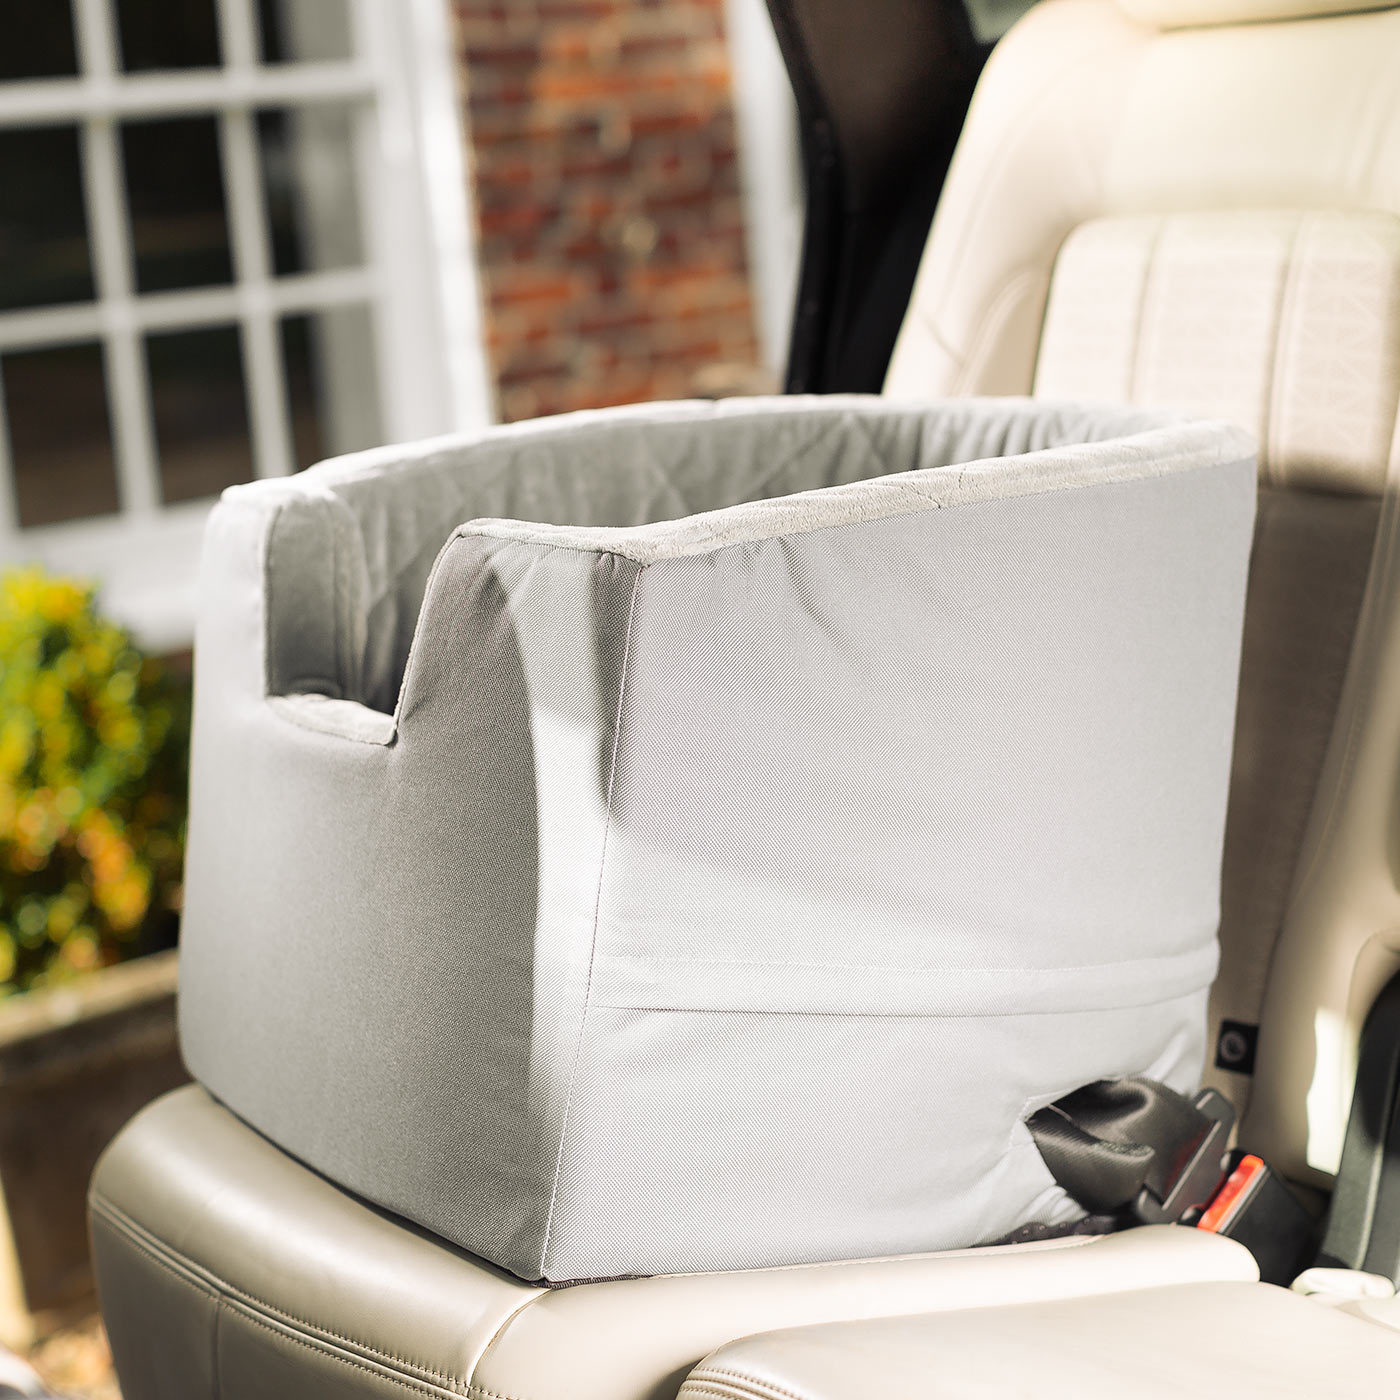 Embark on the perfect pet travel with our luxury car booster seat! Featuring removable cushion with foam padding for extra comfort! Available now at Lords & Labradors       